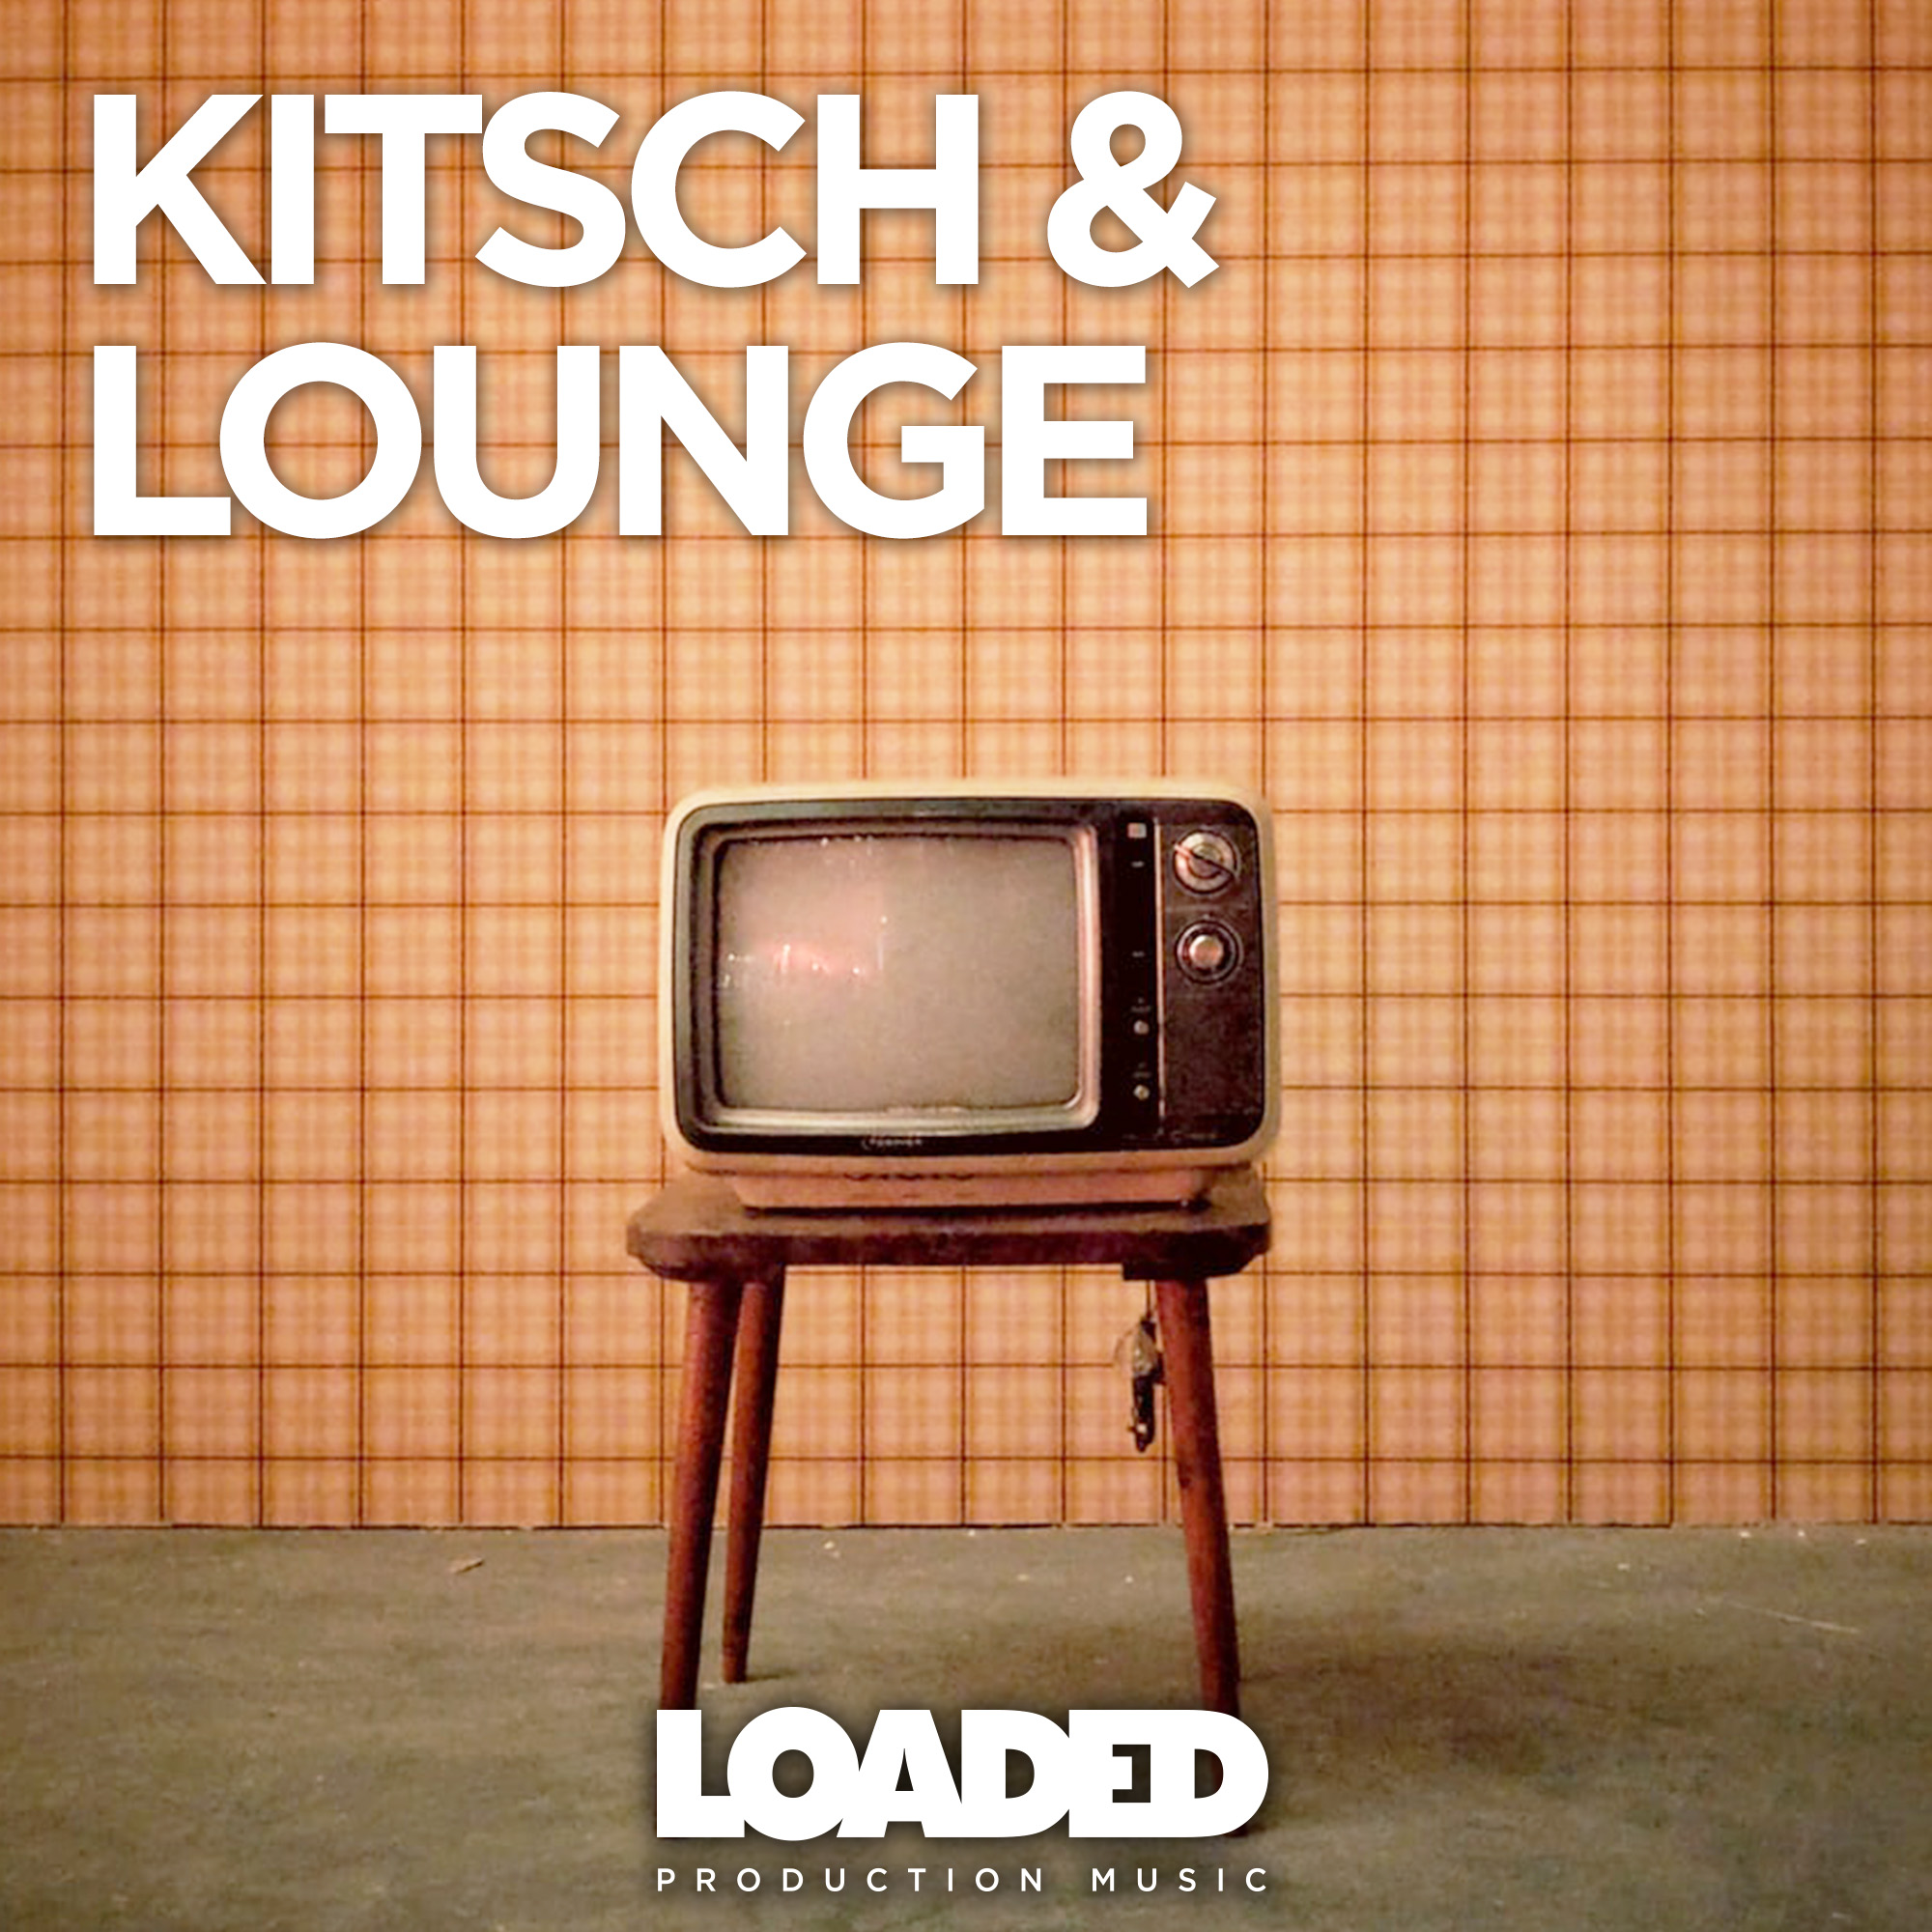 LPM 047 - Kitsch and Lounge - Album Cover